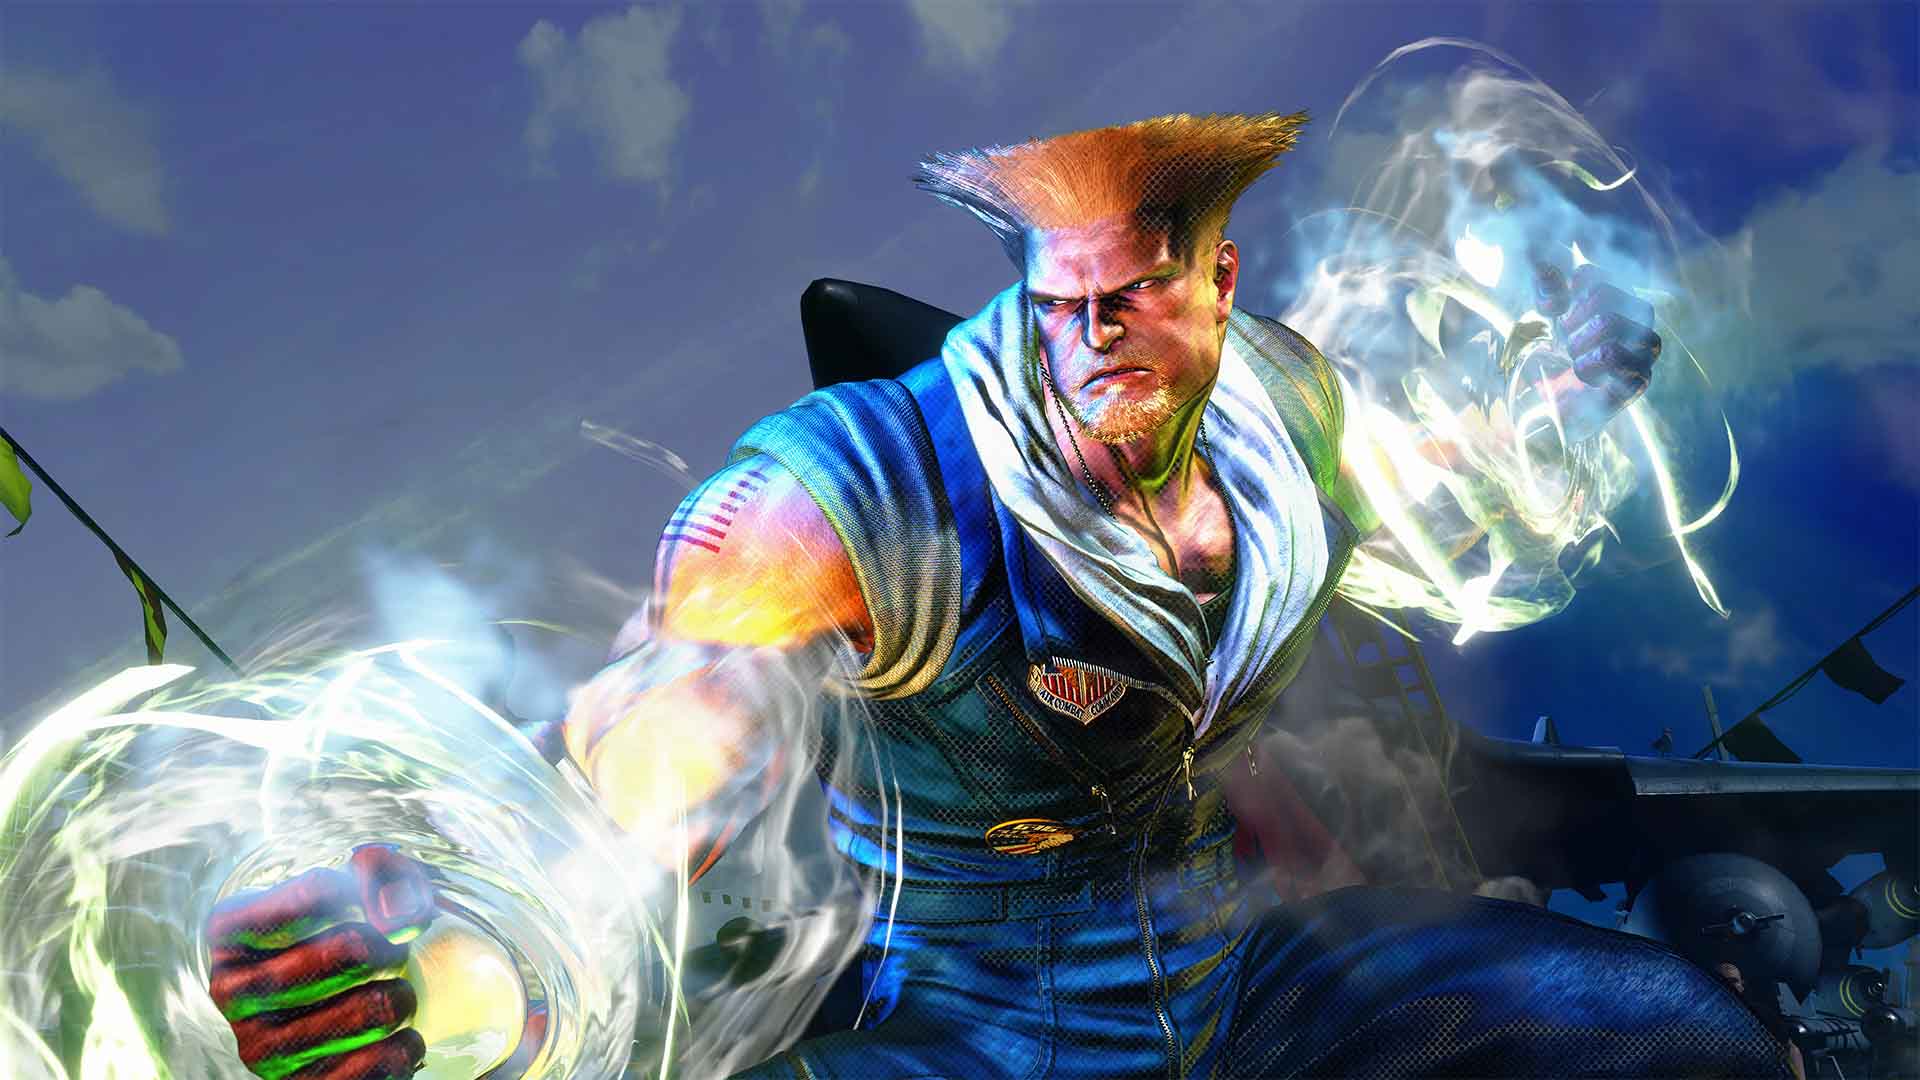 UPDATE - Official Trailer] Street Fighter V DLC Character Guile Critical  Art, Theme Showcased In New Videos